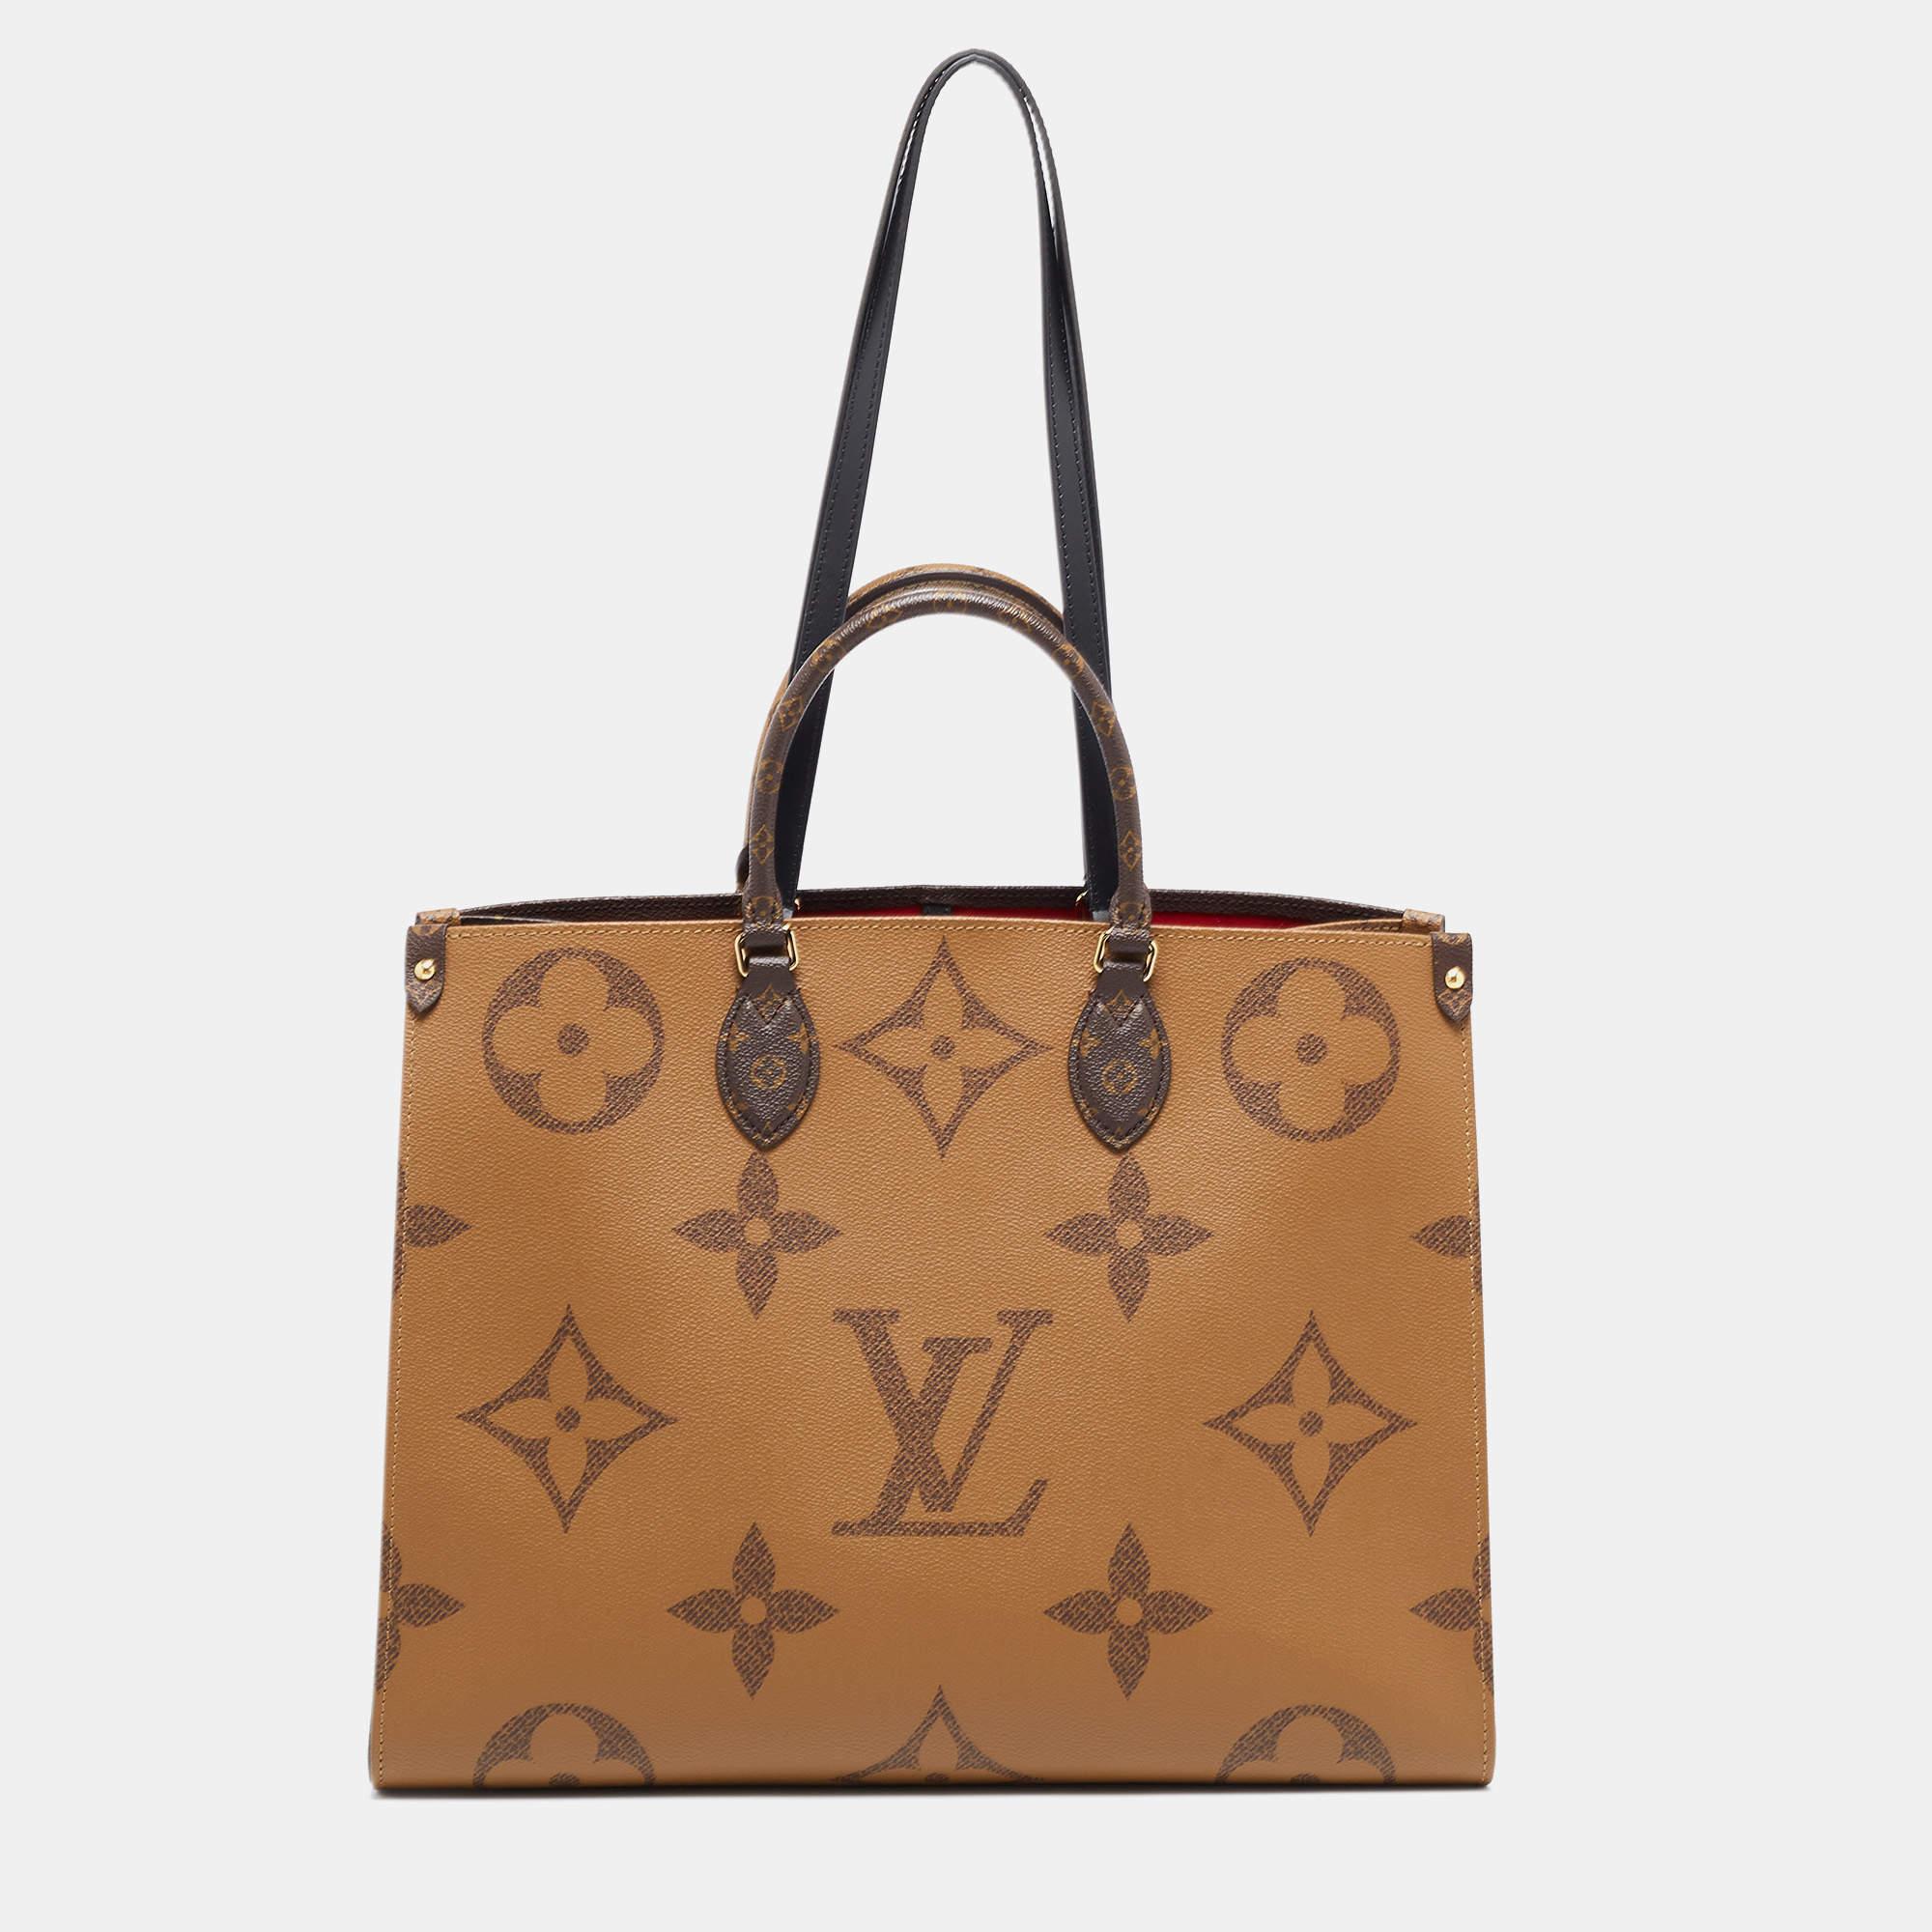 From Louis Vuitton’s Monogram Giant capsule collection comes this Onthego bag that presents the iconic pattern in a new style. It features the signature logo and flower motifs in a super-sized format. This creation is a structured tote with an